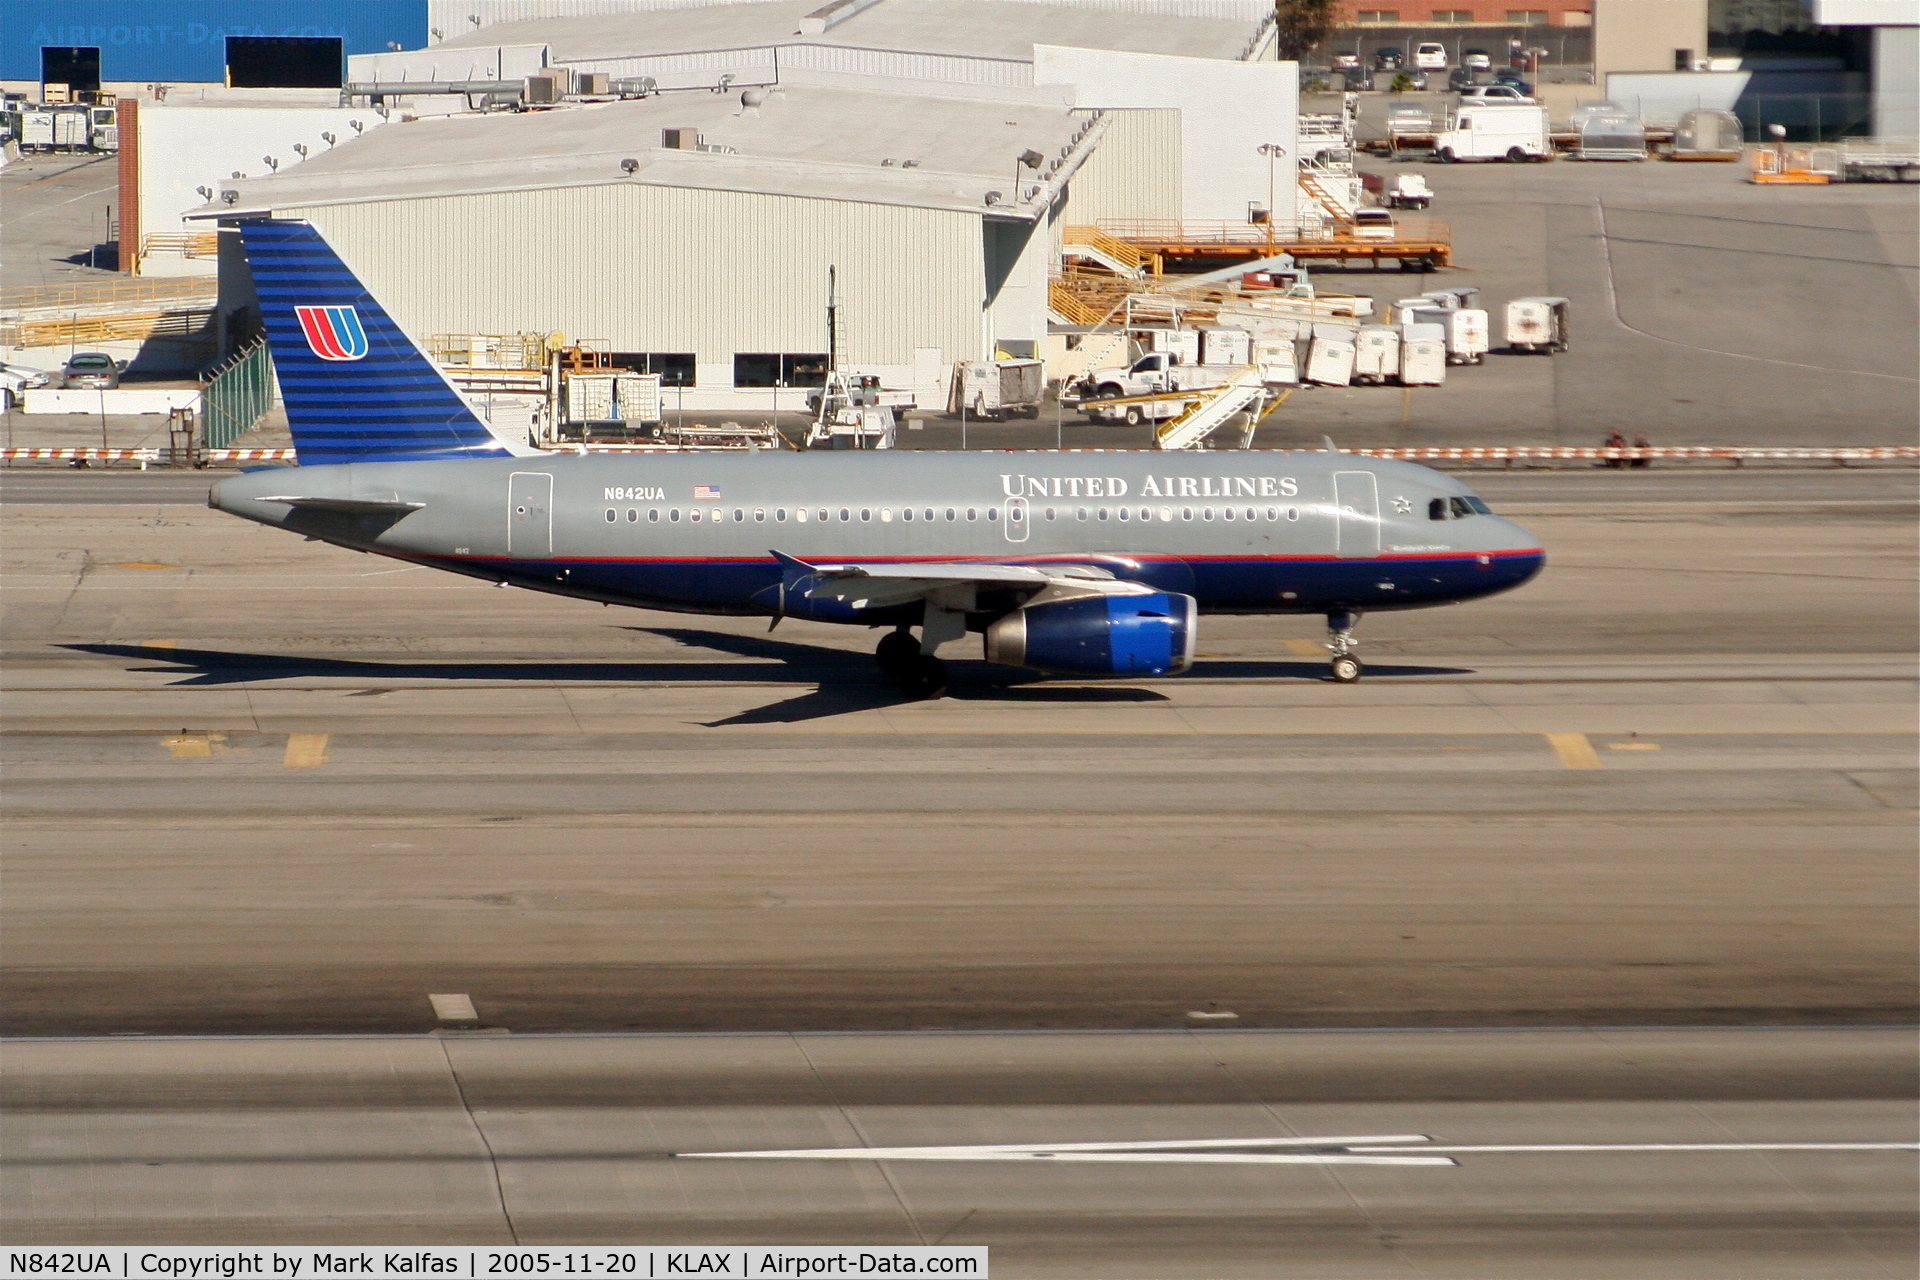 N842UA, 2001 Airbus A319-131 C/N 1569, United Airlines Airbus A319-131, N842UA taxiway Bravo for 25R KLAX.